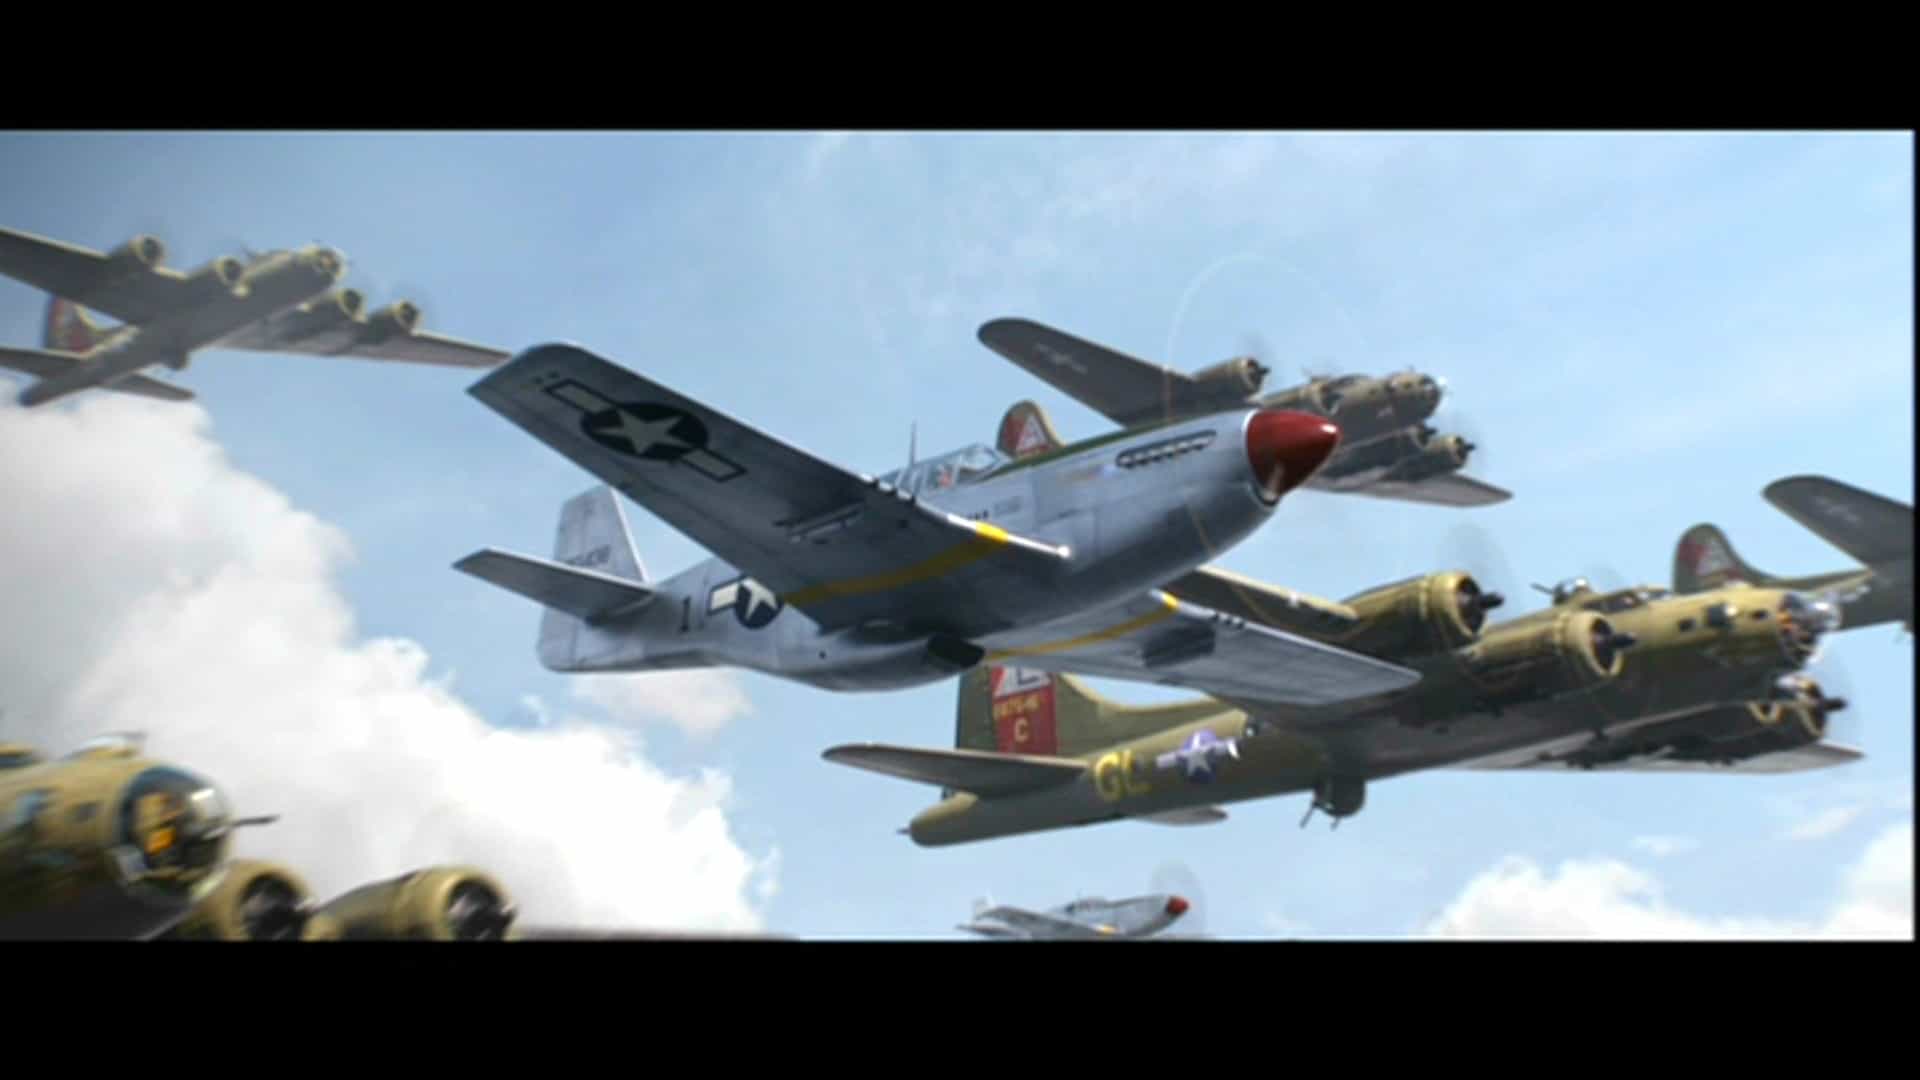 Red Tails Wallpaper HD. Red